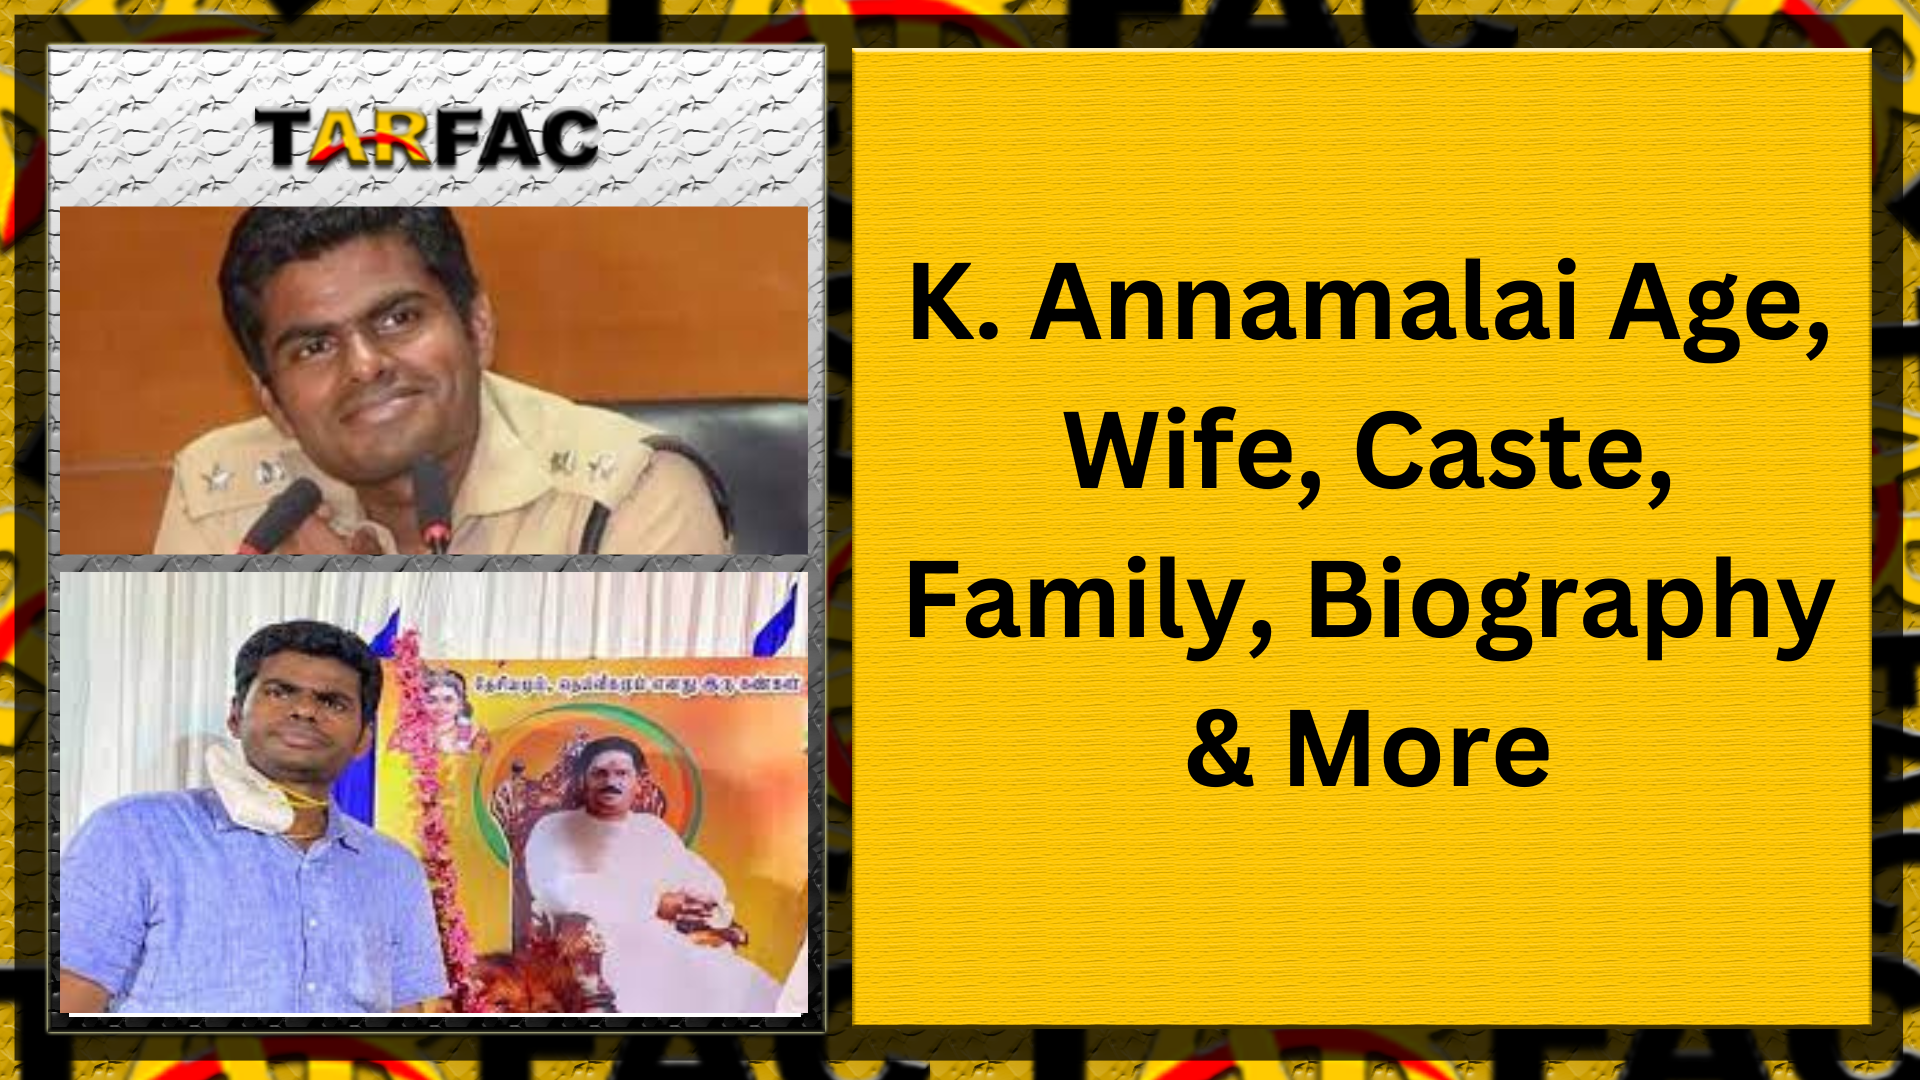 You are currently viewing K. Annamalai Age, Wife, Caste, Family, Biography & More